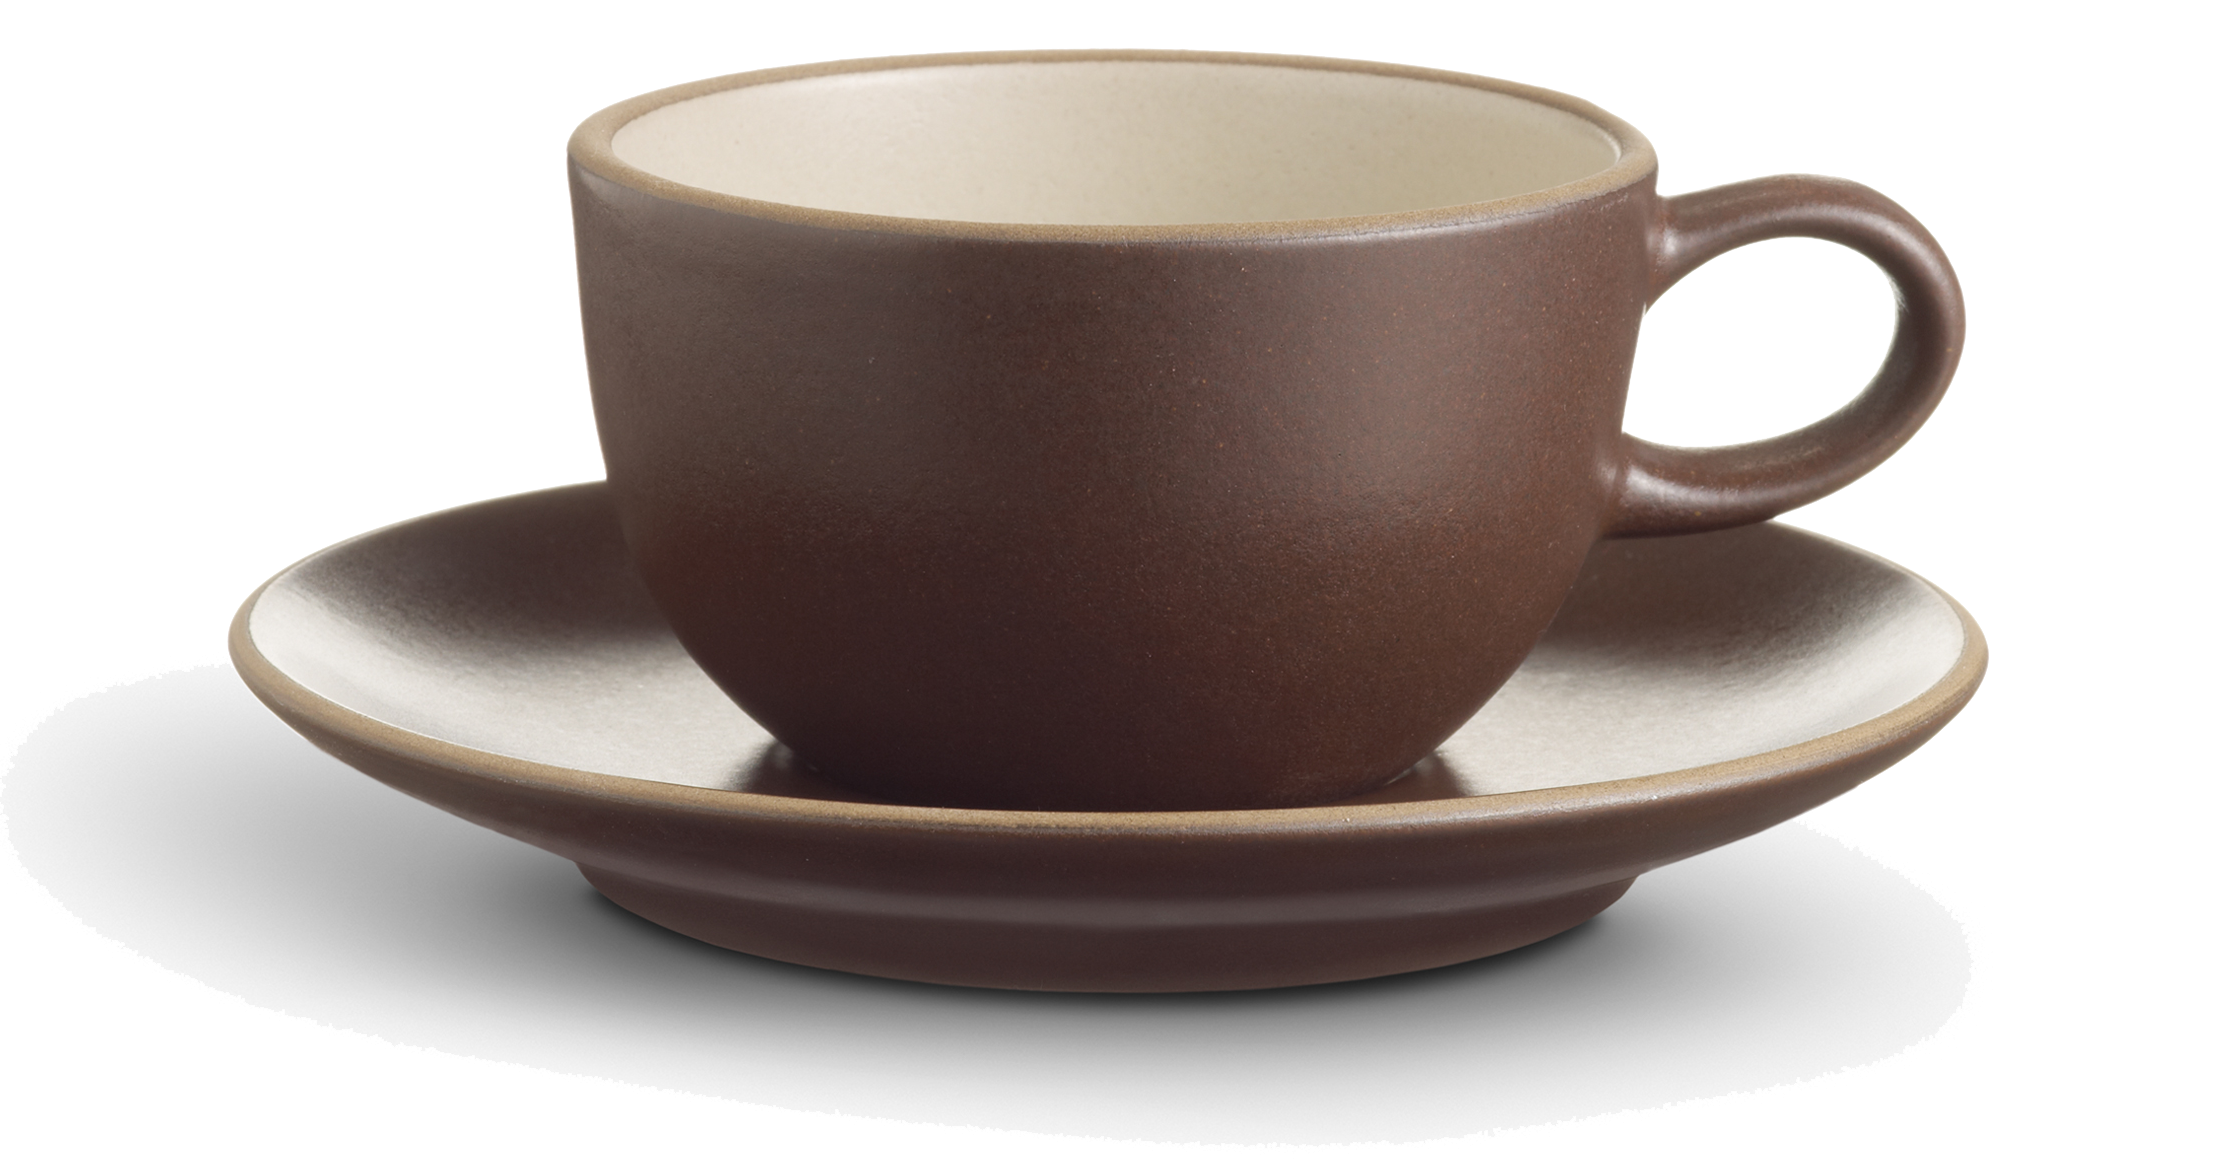 Tea Cup Png Clipart - Cup Of Tea, Transparent background PNG HD thumbnail